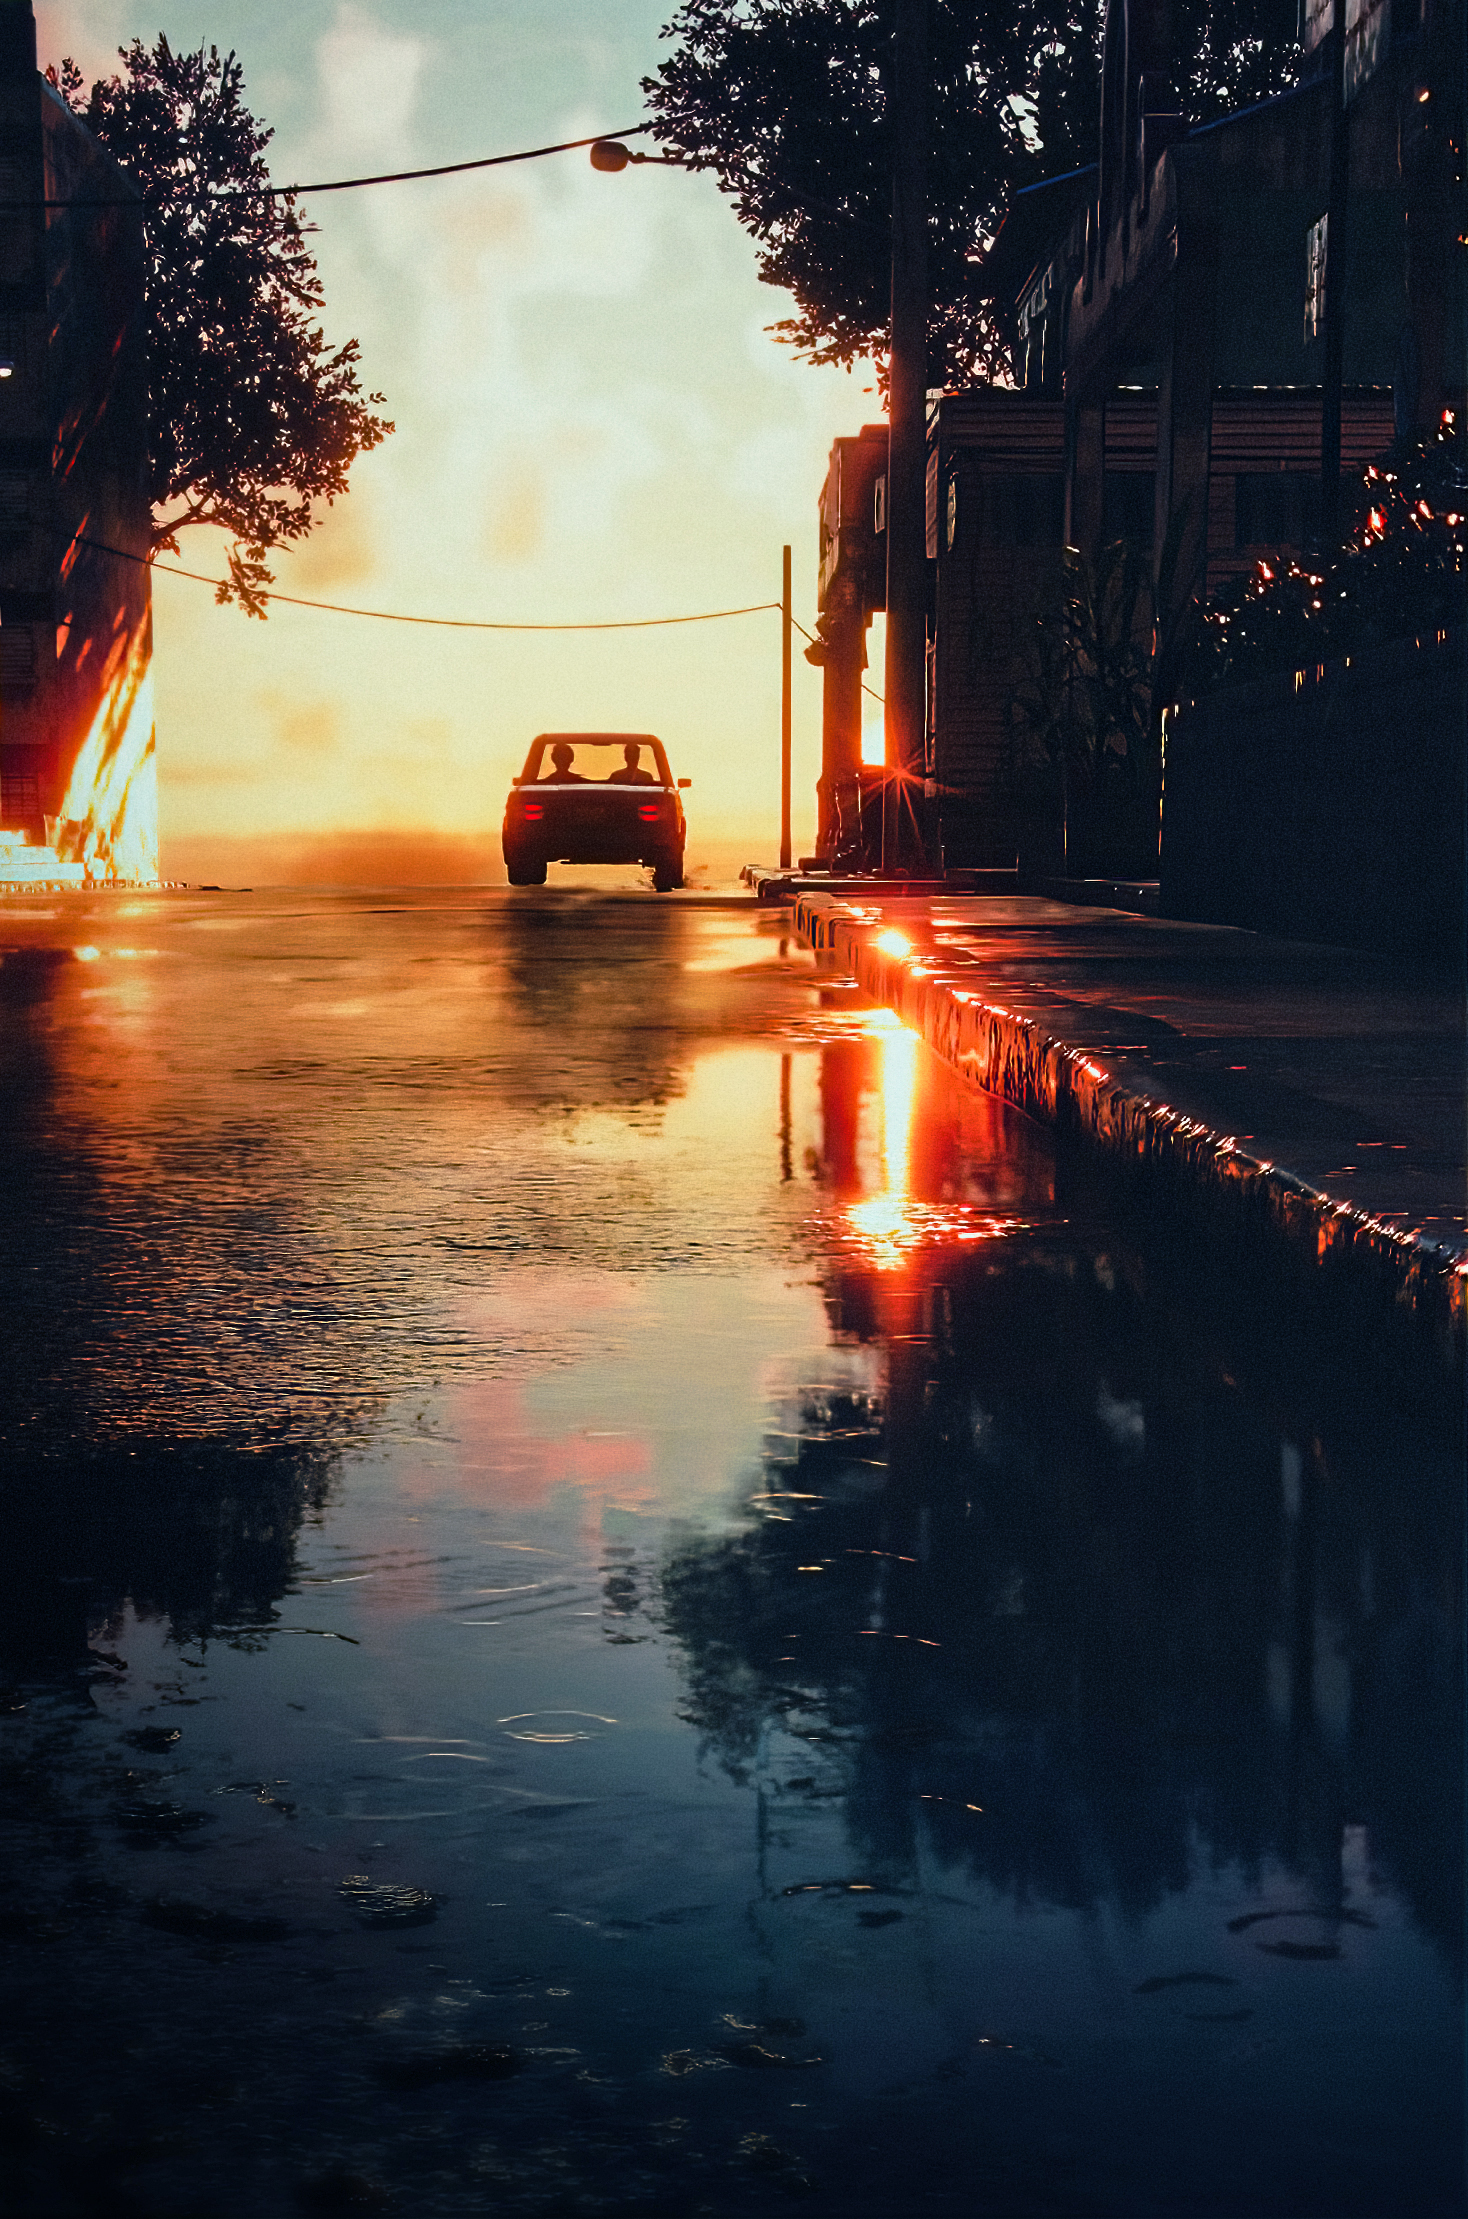 Driving after the rain